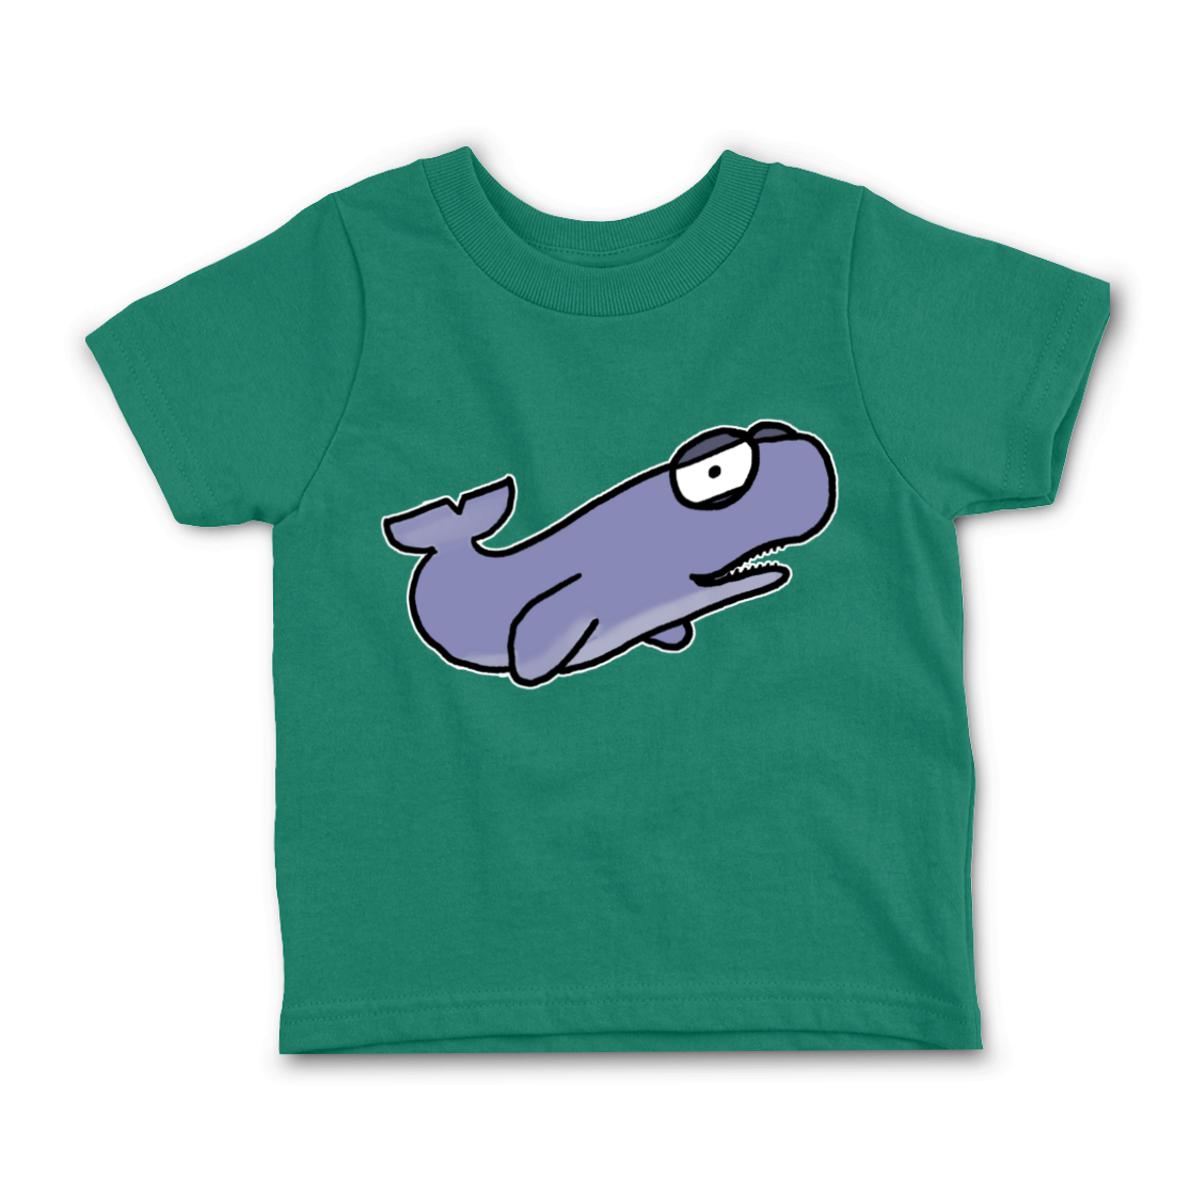 Sperm Whale Toddler Tee 4T kelly